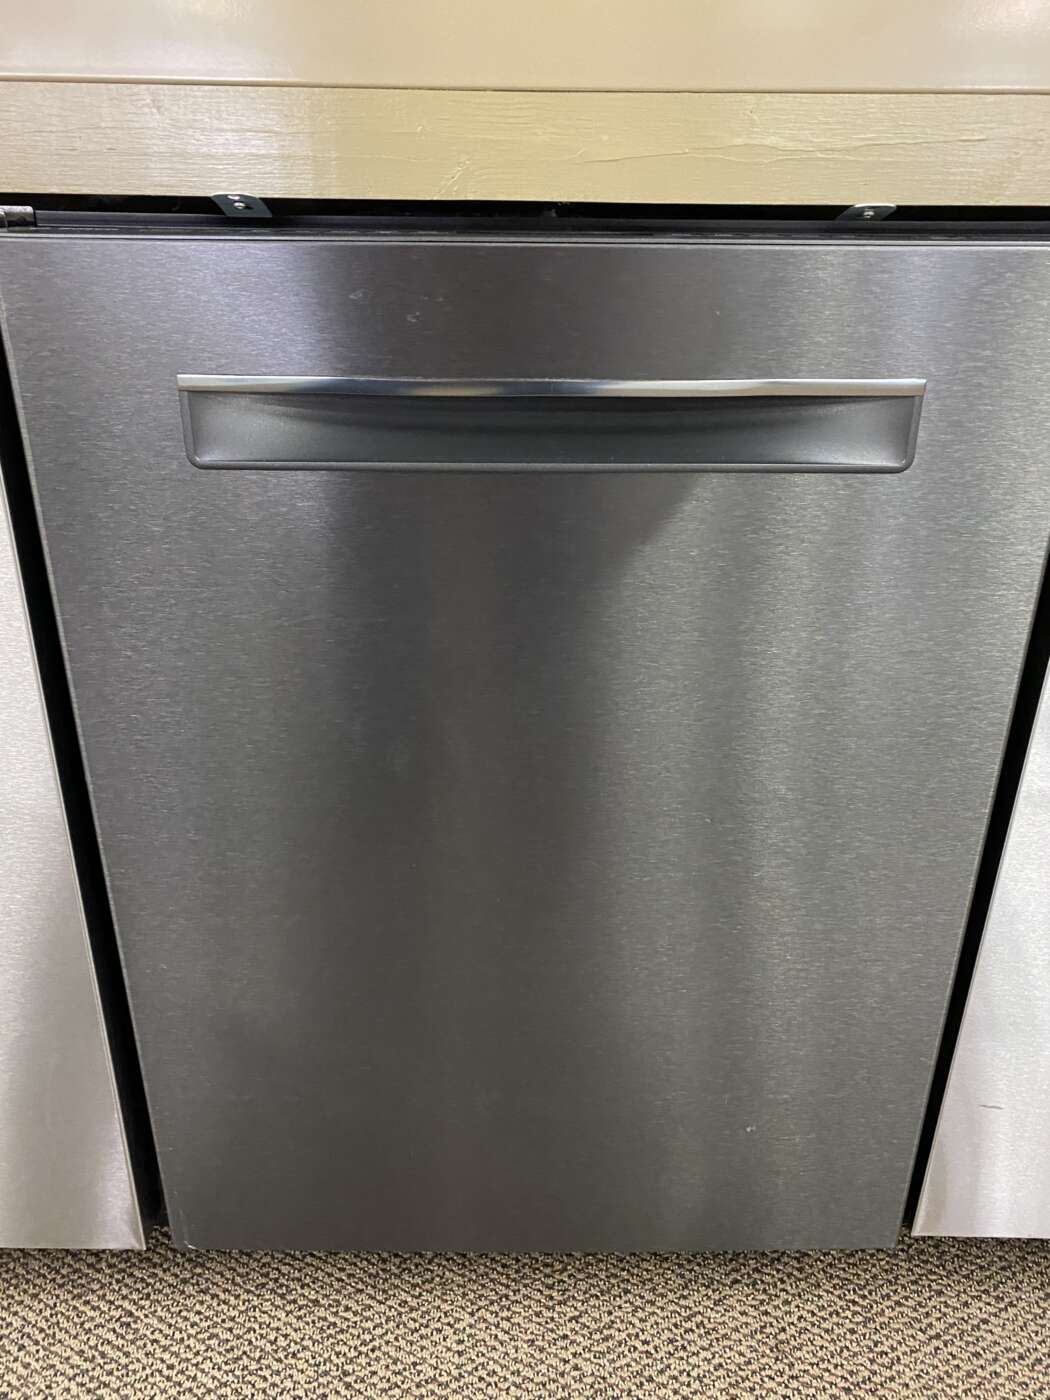 Reconditioned BOSCH Stainless-Tub Built-In Dishwasher With 3-Racks – Black Stainless